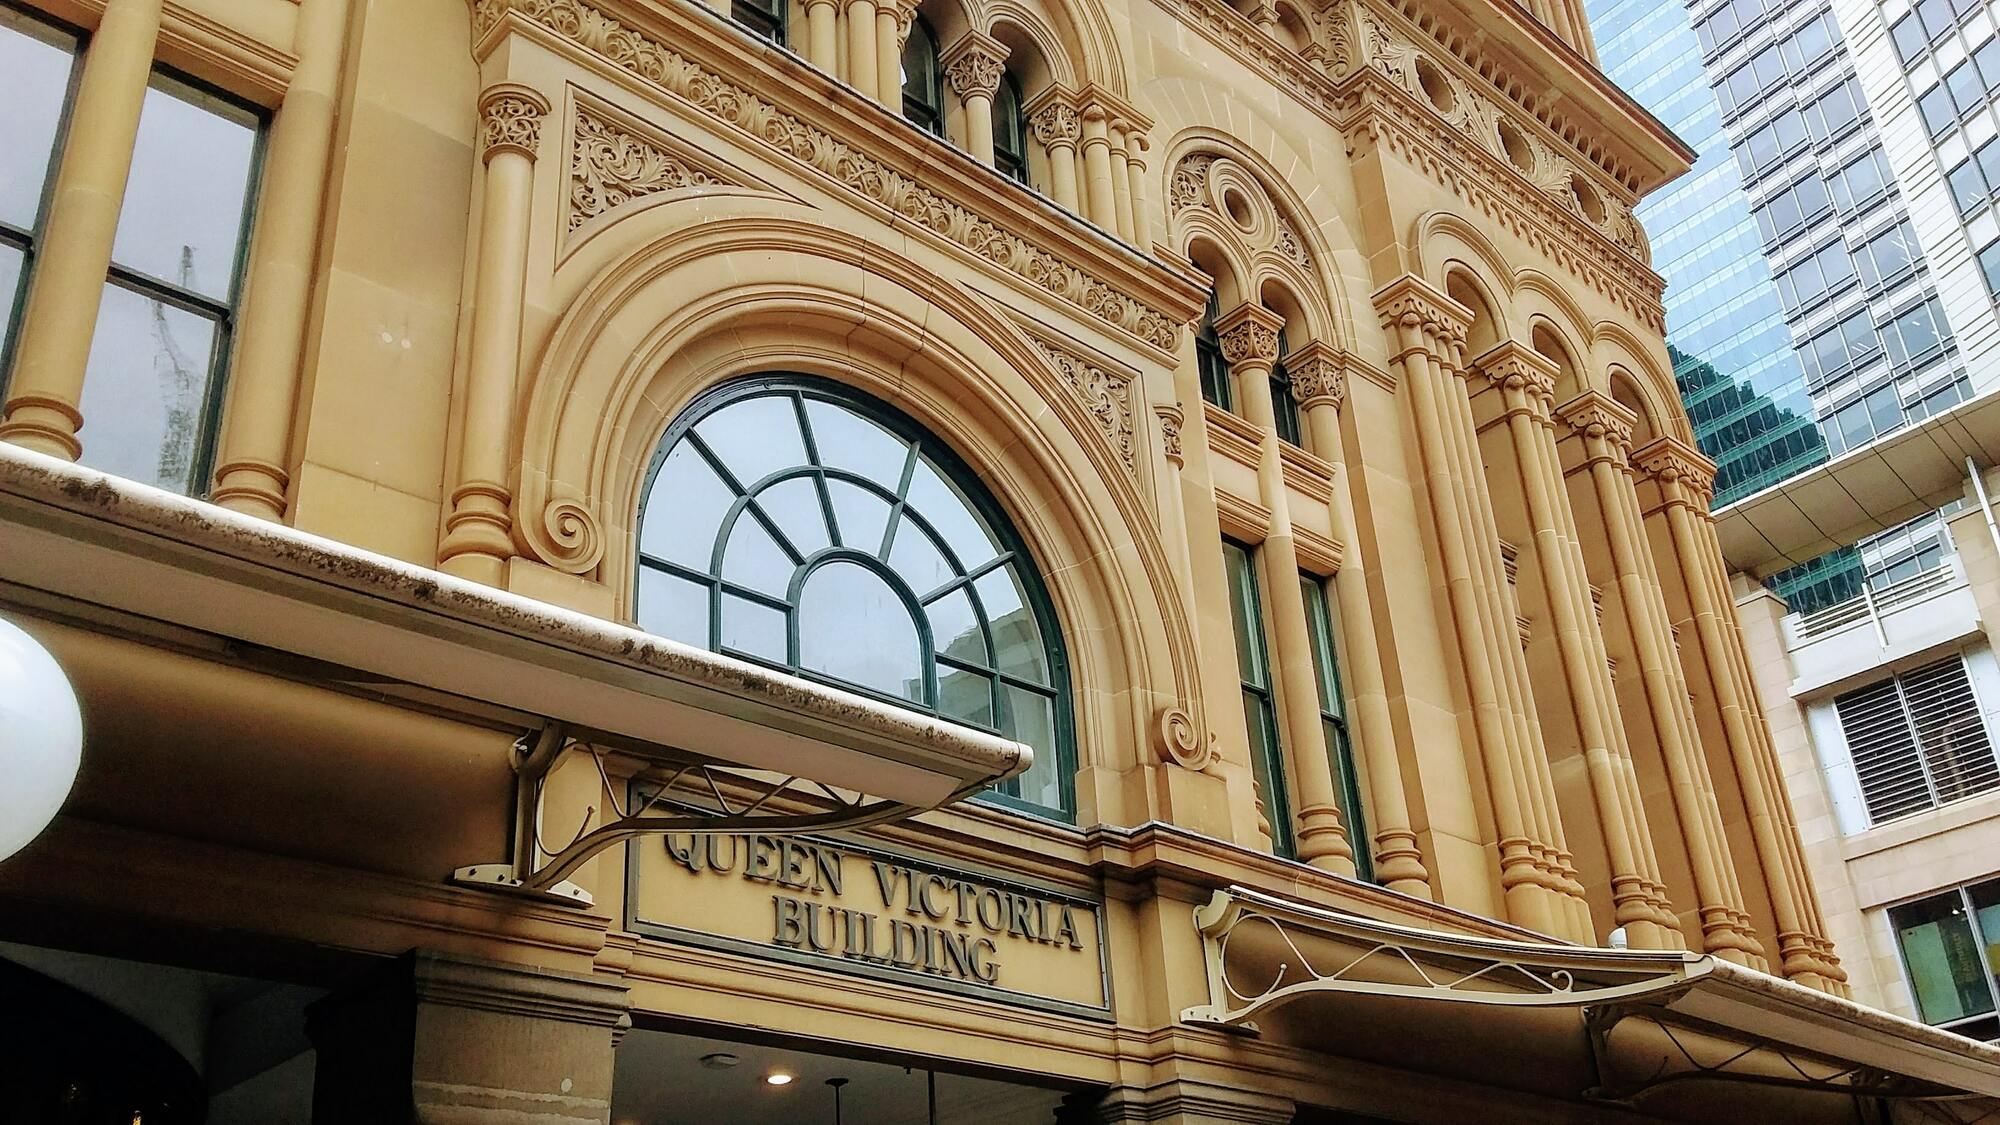 <p>The Queen Victoria building dates back to the 19th century and is in the financial heart of Sydney. As many pass through Sydney during their visit to Australia, this building is high on the list of most photographed items in the Australian landscape and architecture.</p> <p>Photo: Deeva Sood / Unsplash</p>